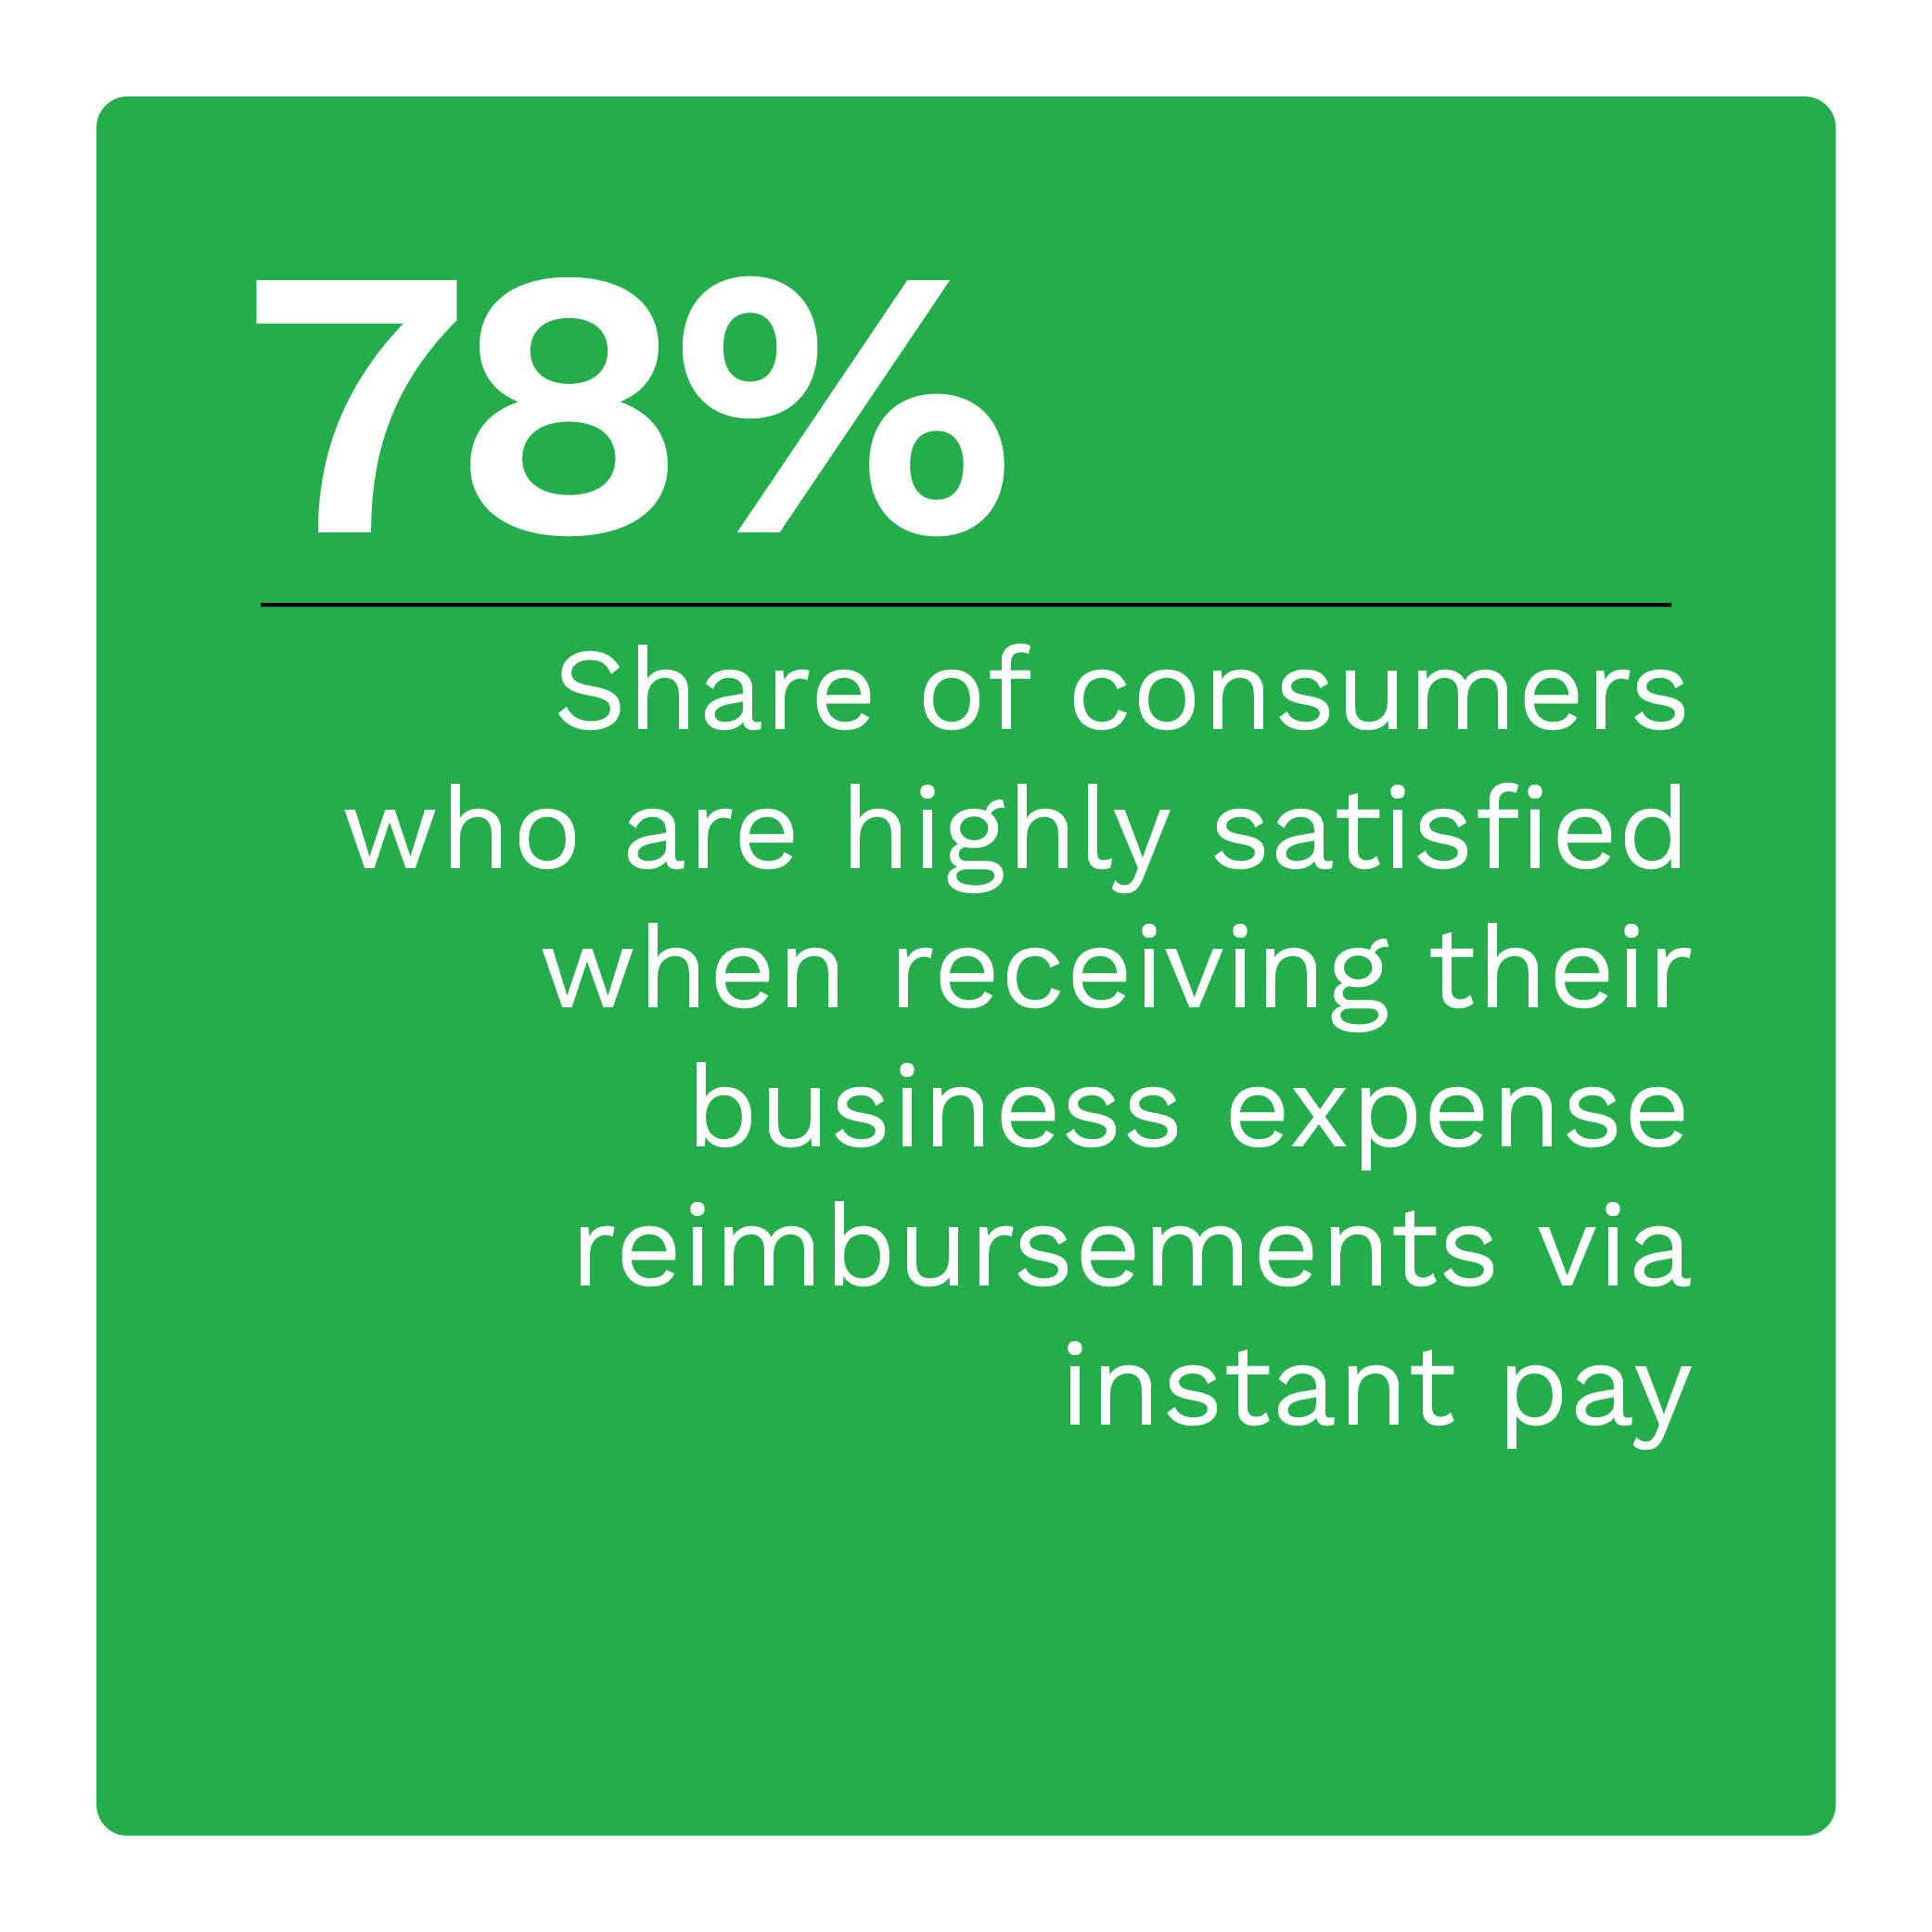 78%: Share of consumers who are highly satisfied when receiving their business expense reimbursements via instant pay